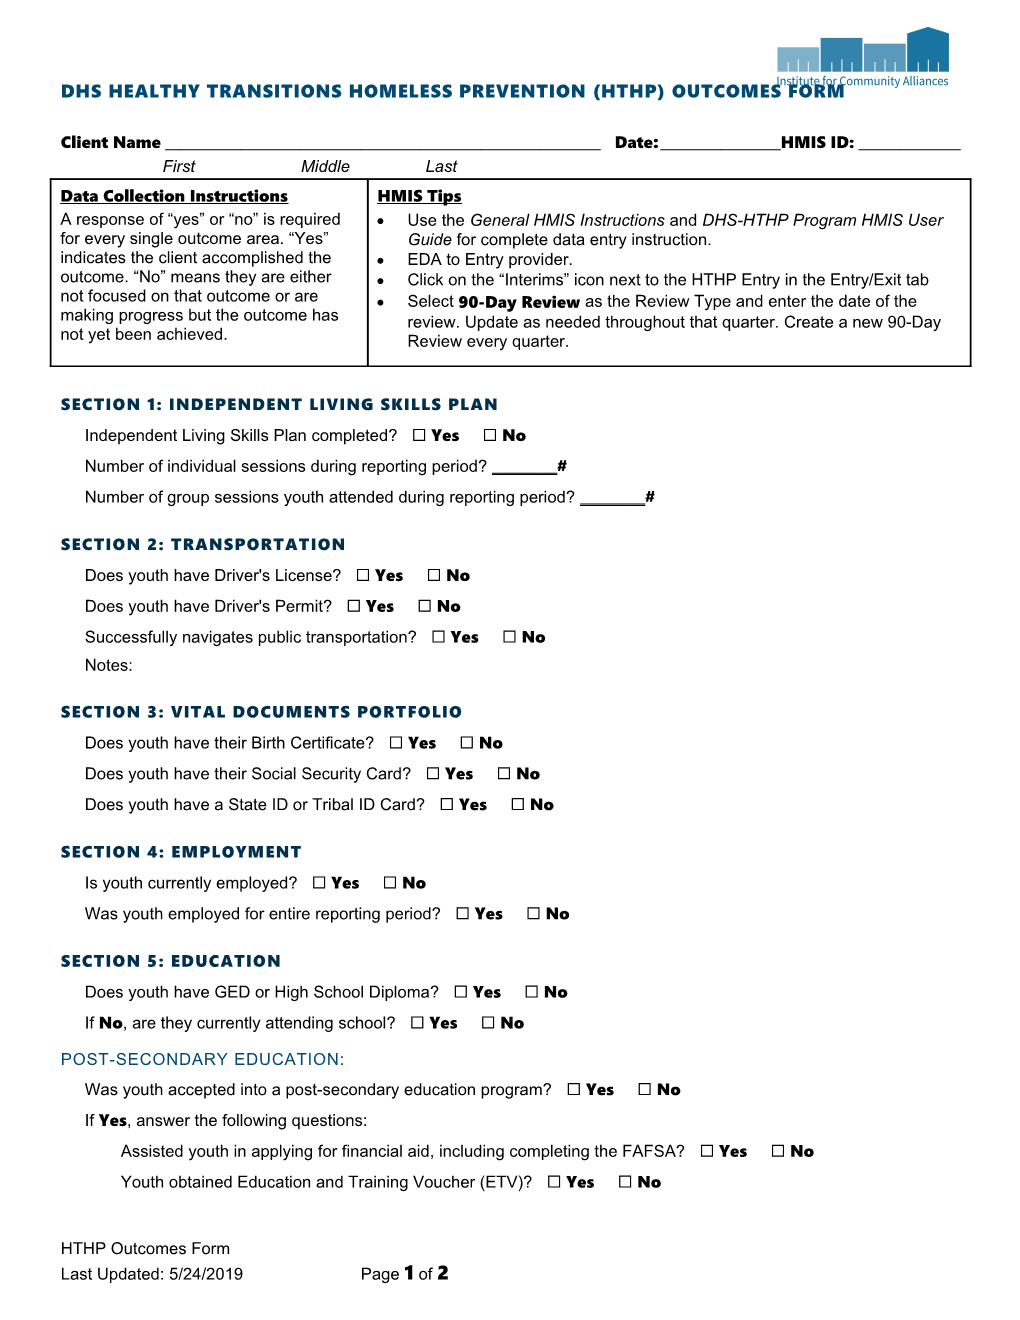 DHS Healthy Transitions Homeless Prevention (HTHP) Outcomes Form